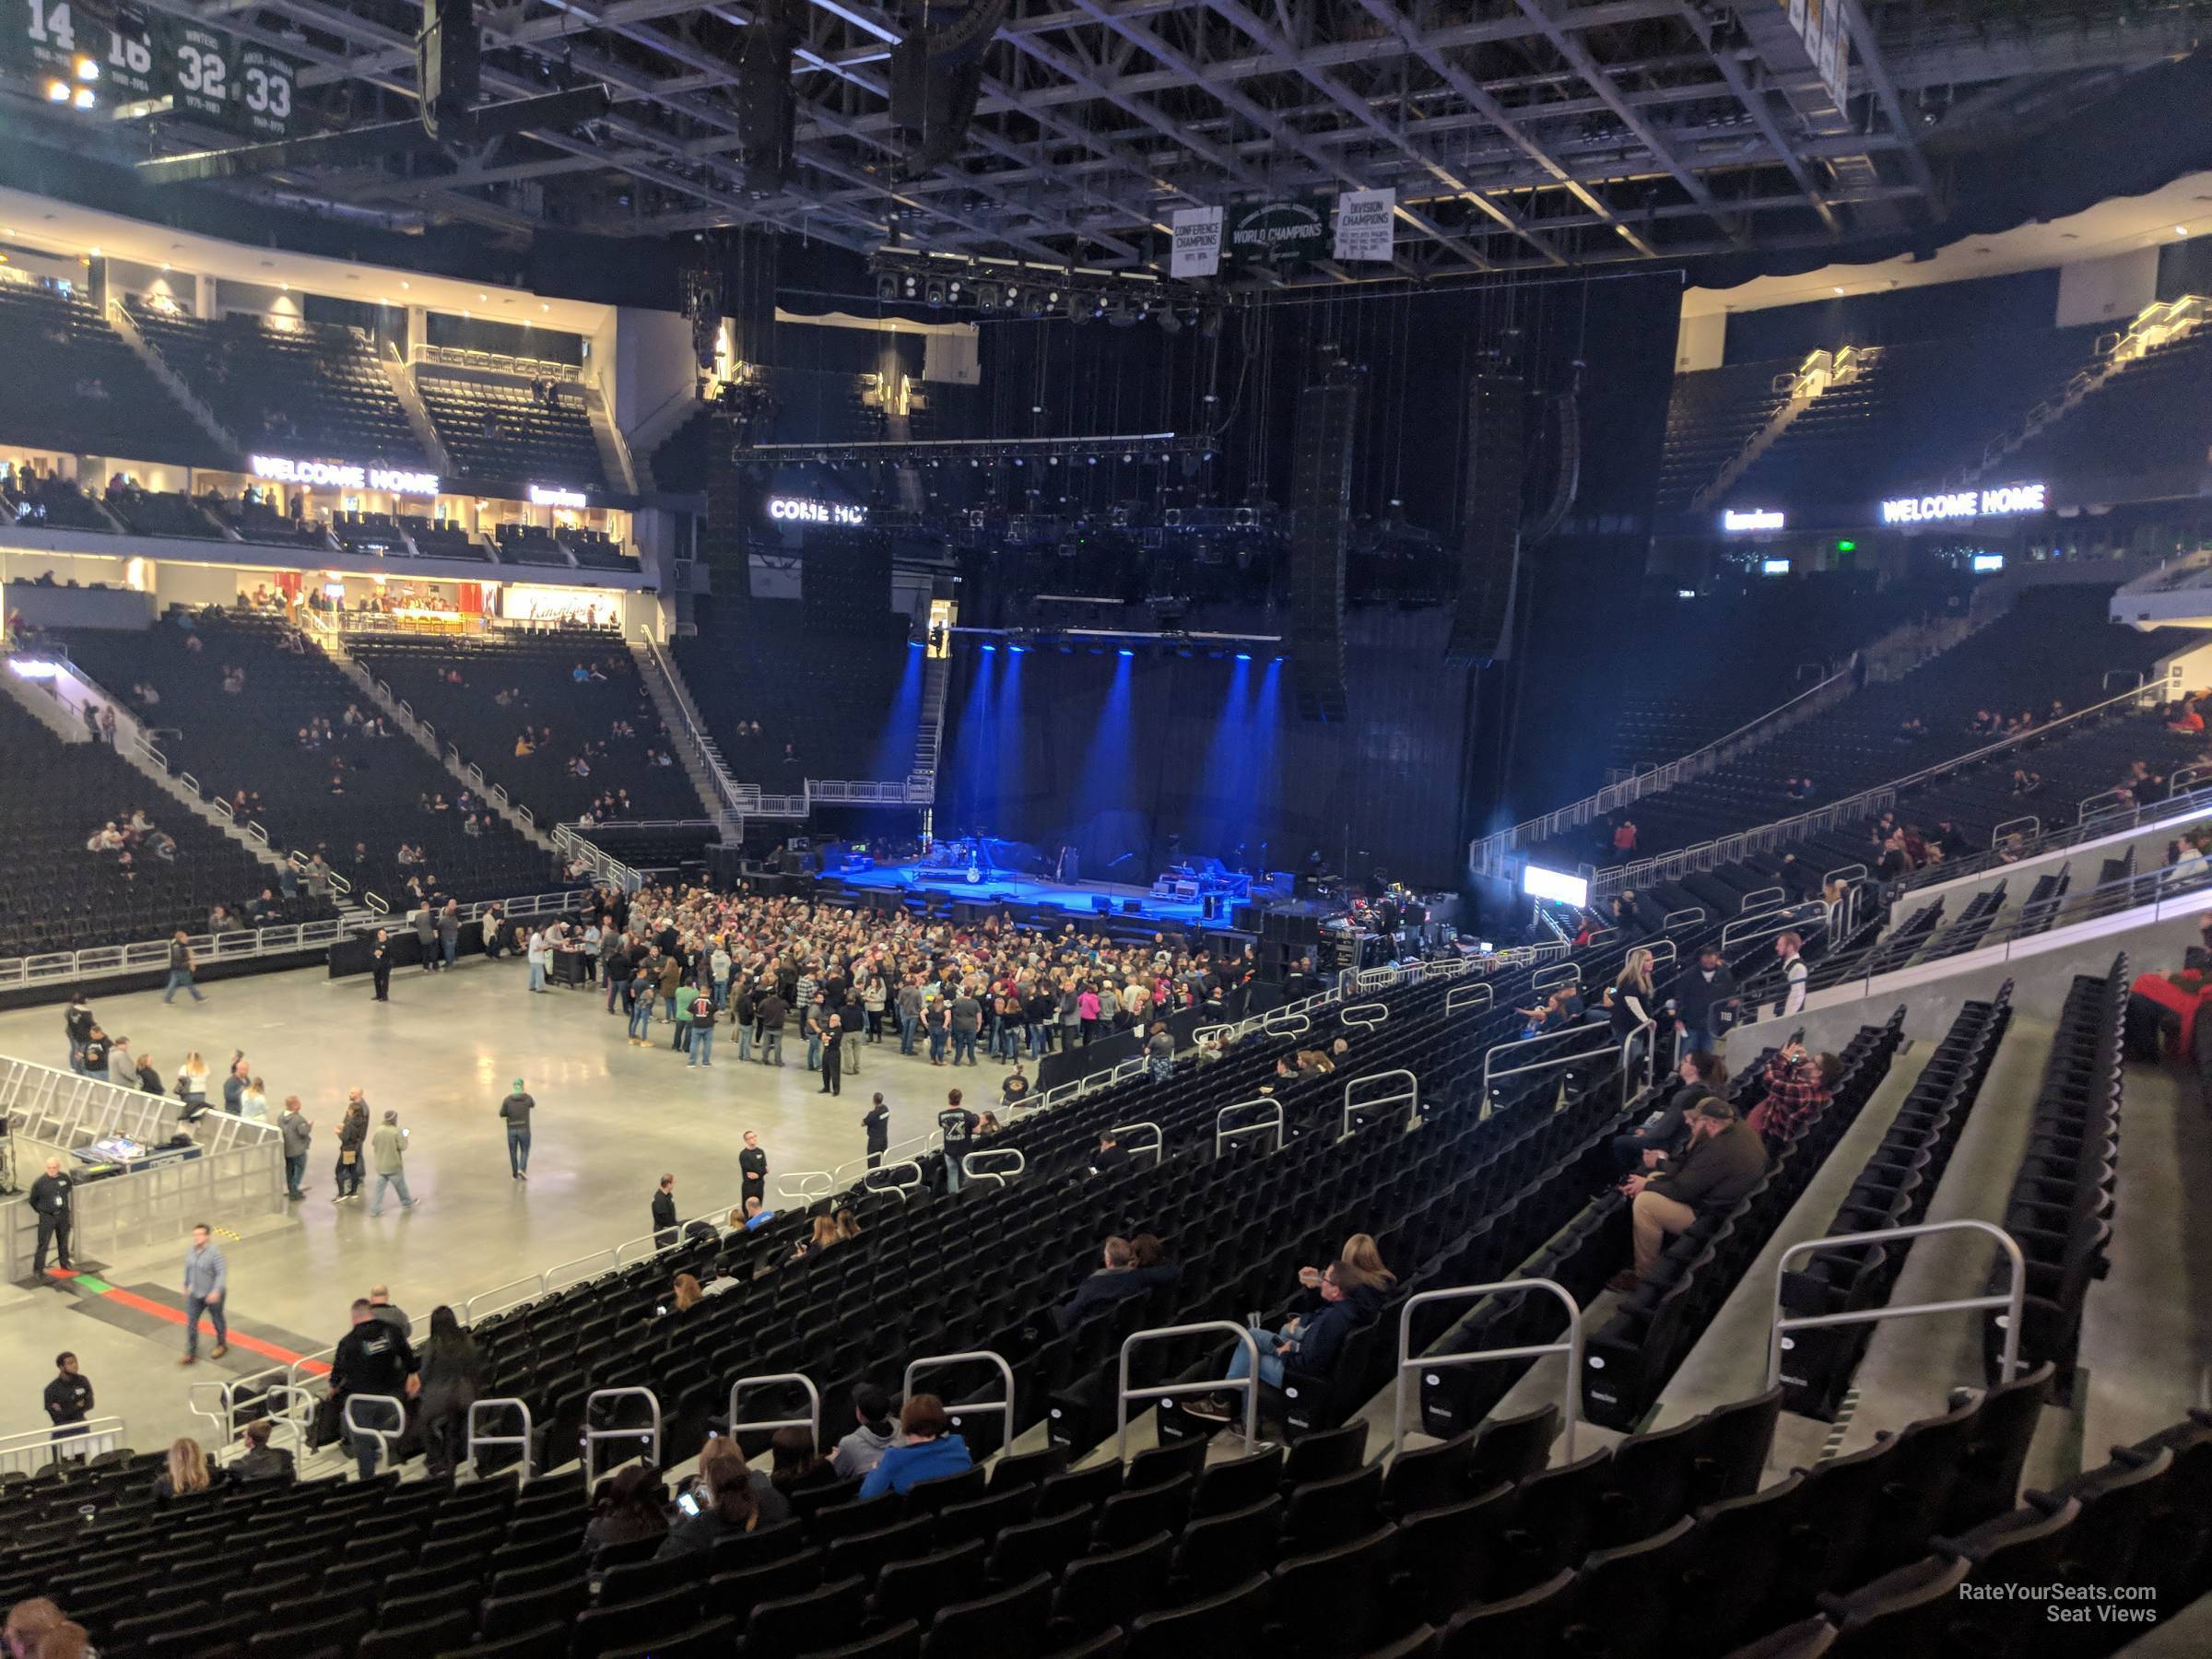 section 119, row 23 seat view  for concert - fiserv forum